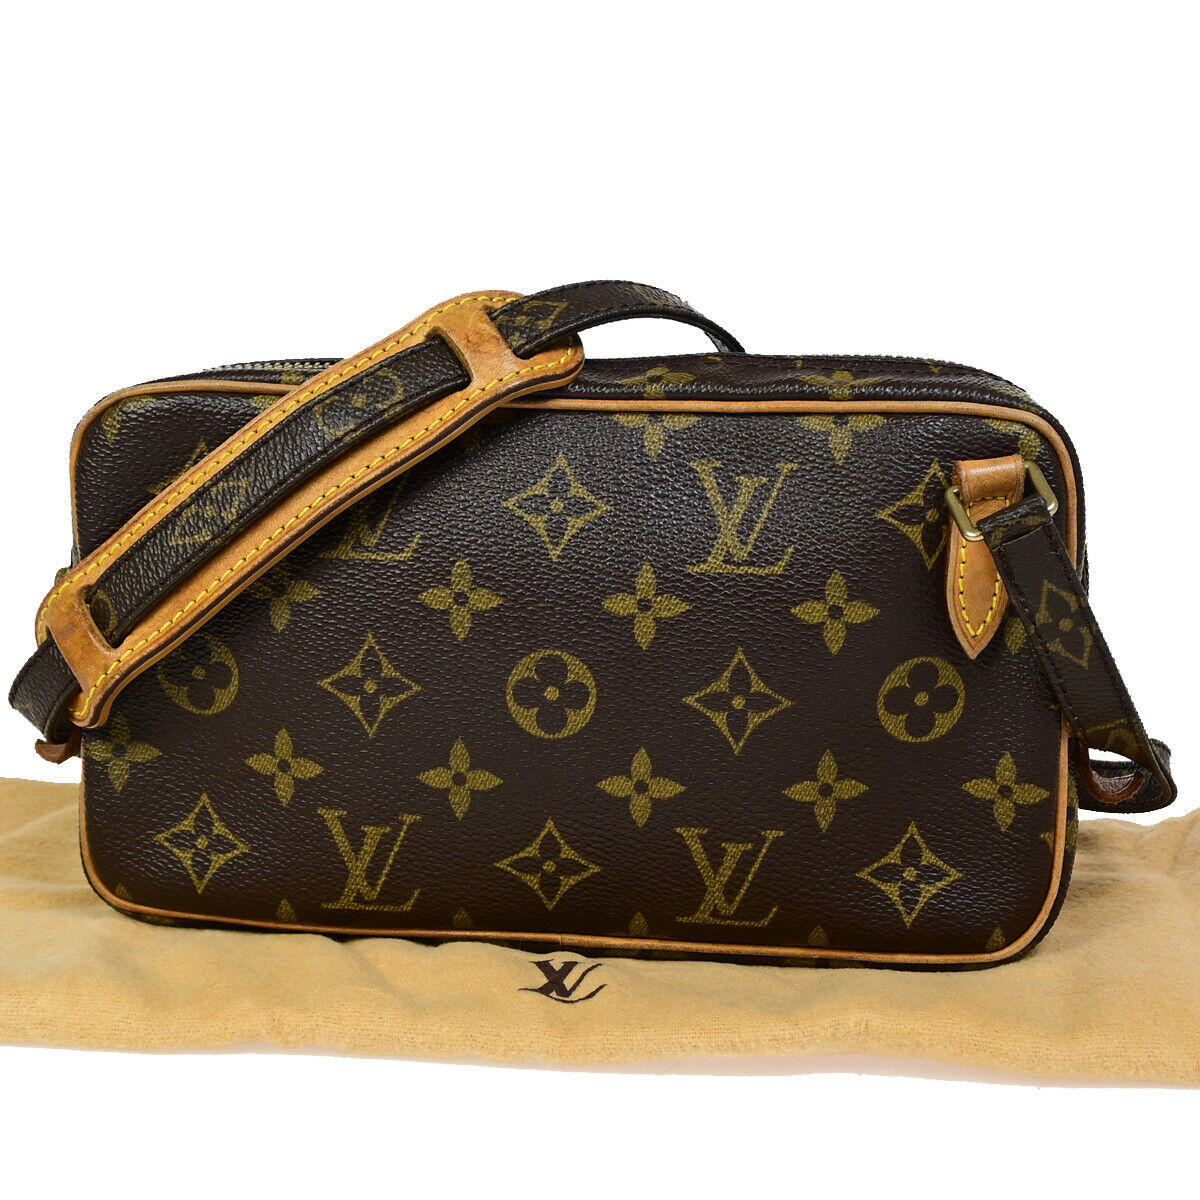 Pre-owned Louis Vuitton Marly Brown Canvas Shoulder Bag ()